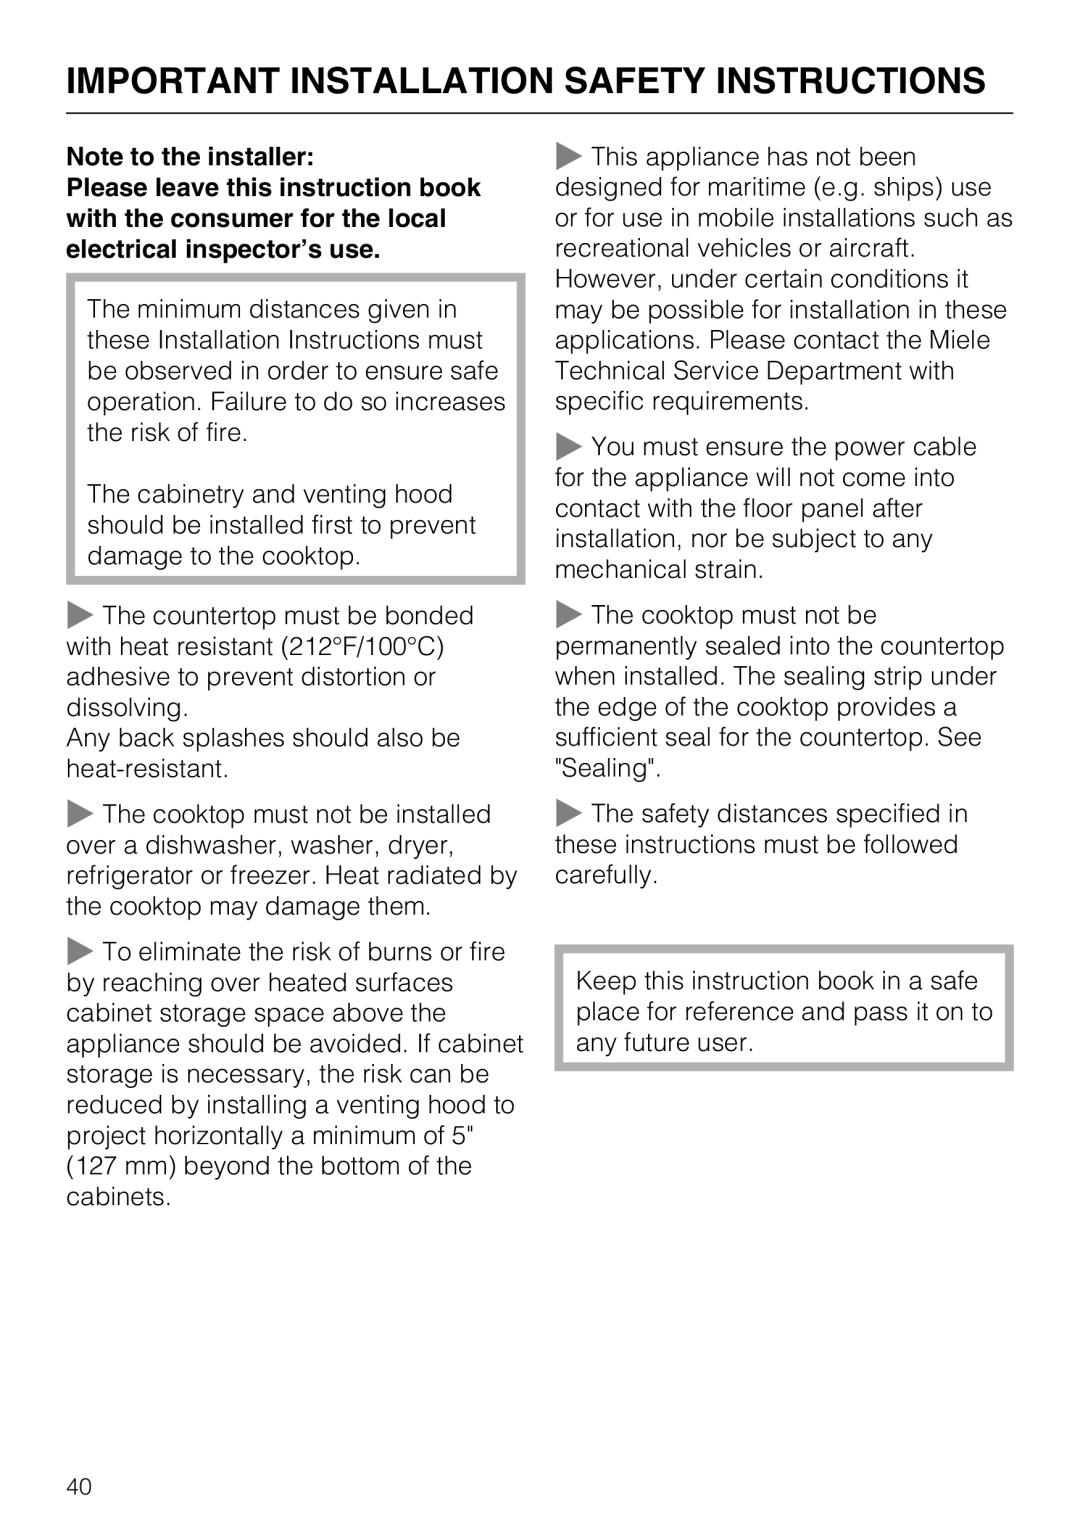 Miele KM 5880, KM 5860, KM 5840 installation instructions Important Installation Safety Instructions, Note to the installer 